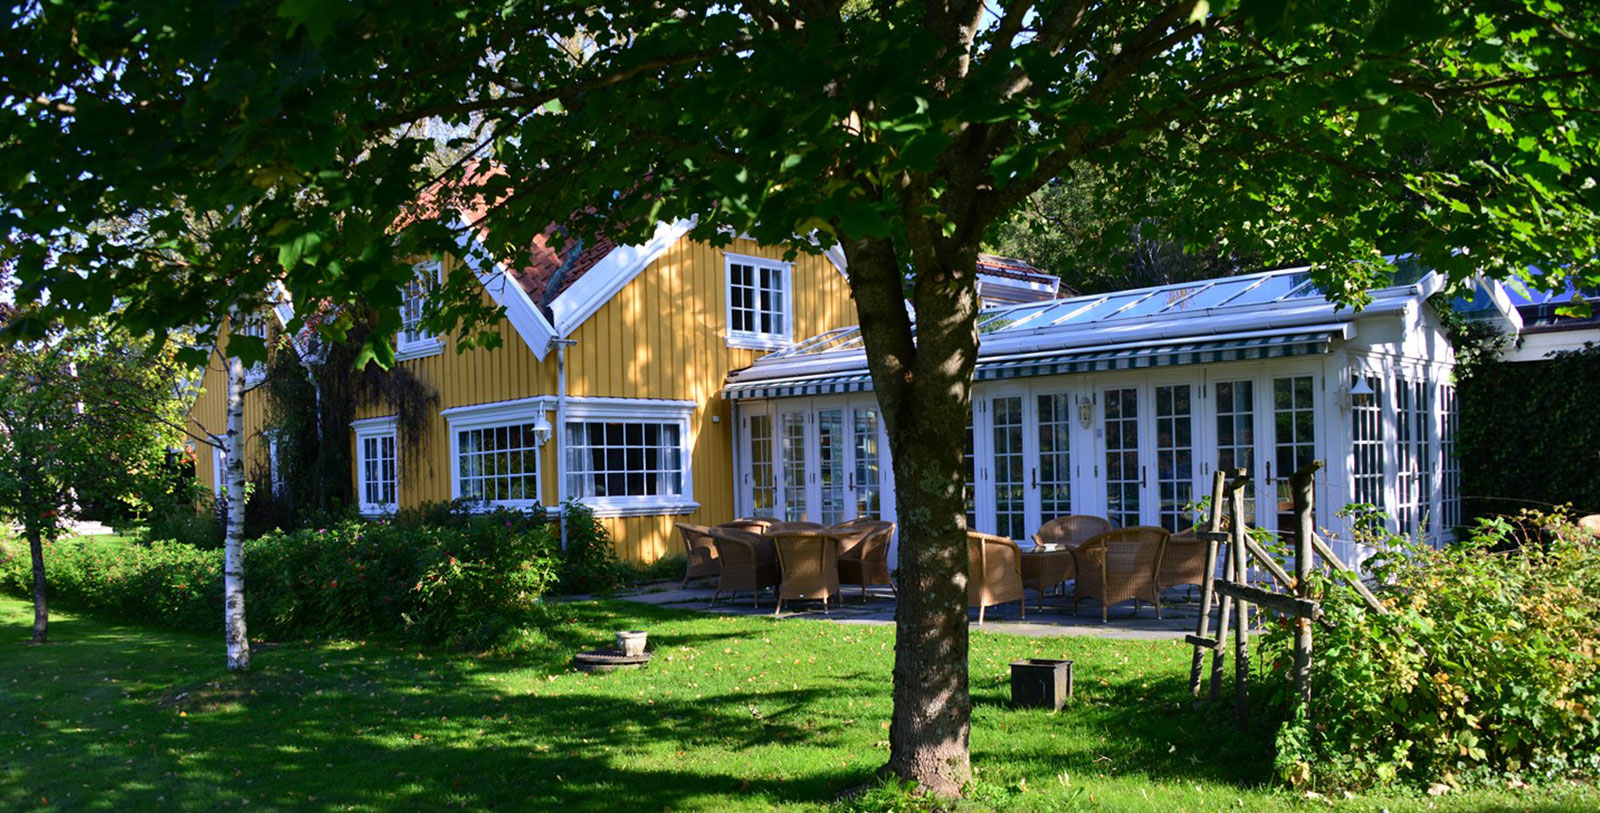 Image of Hotel Exterior, Engø Gård, 1845, Member of Historic Hotels Worldwide, Risør, Norway, Special Offers, Discounted Rates, Families, Romantic Escape, Honeymoons, Anniversaries, Reunions